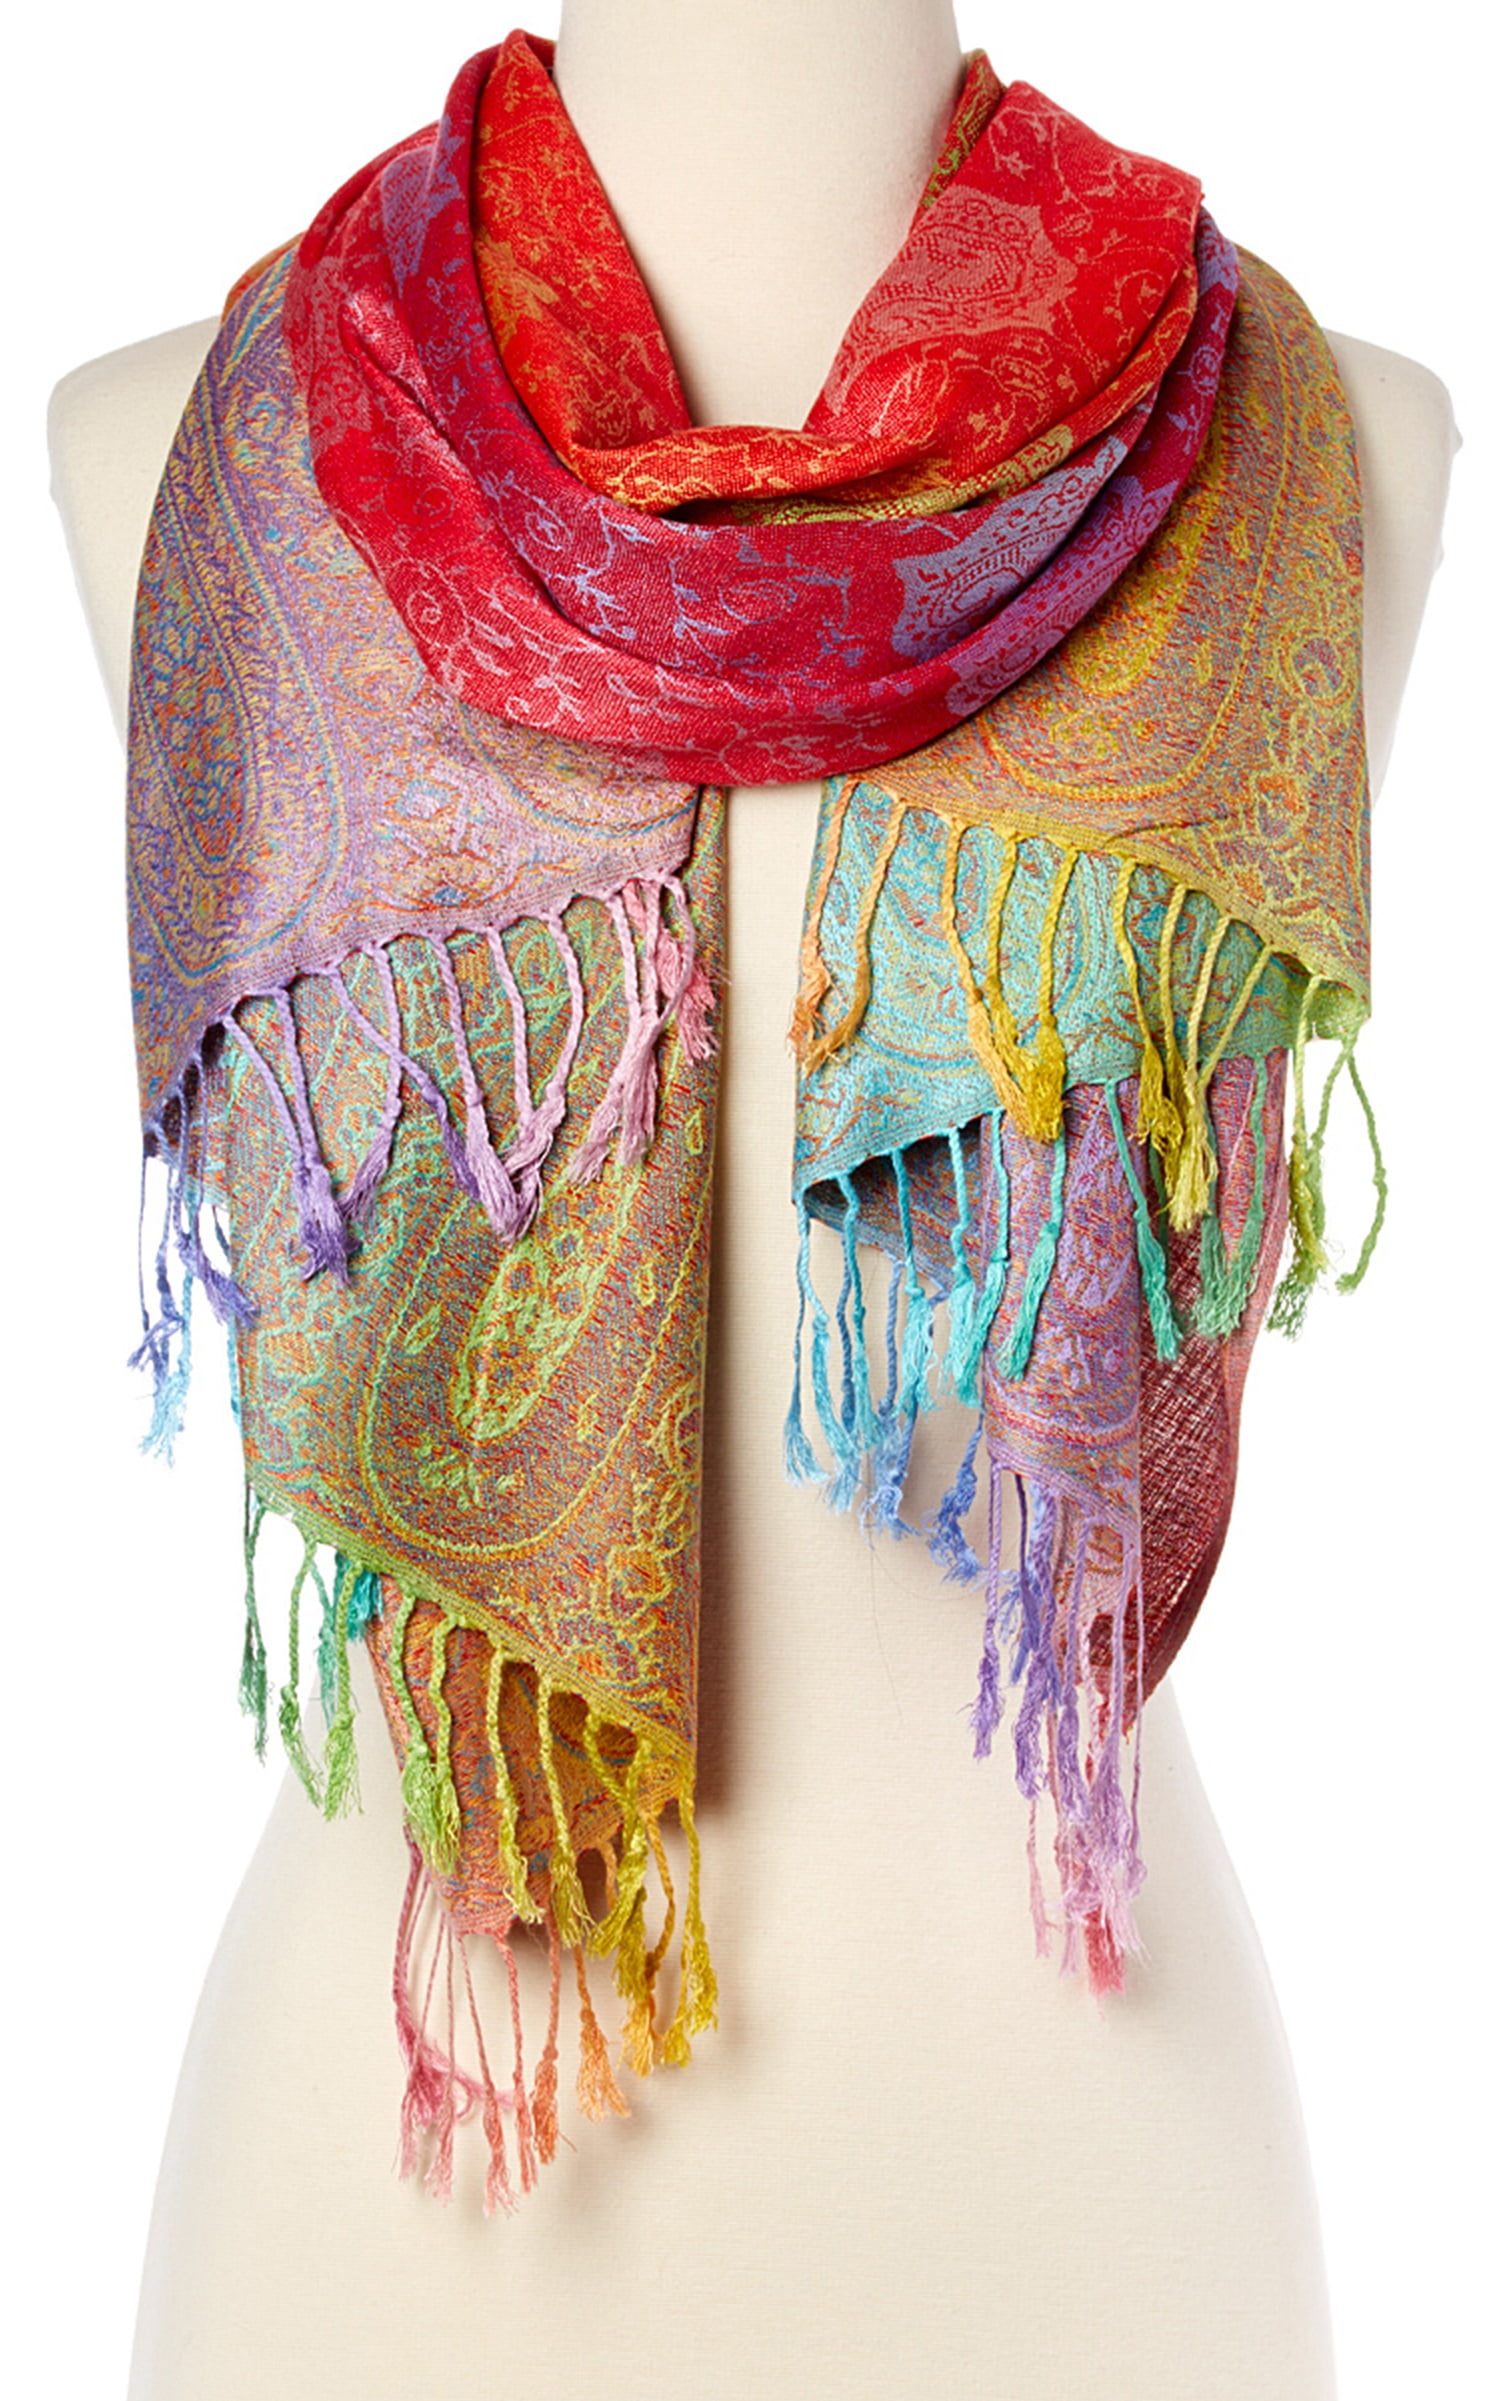 Bulky Shaw Fringes Shawl Wool Infinity Scarf Wool Fringe Scarf Fringe Scarf Anniversary Gift Unique Scarves Wool Scarves Wool Wrap